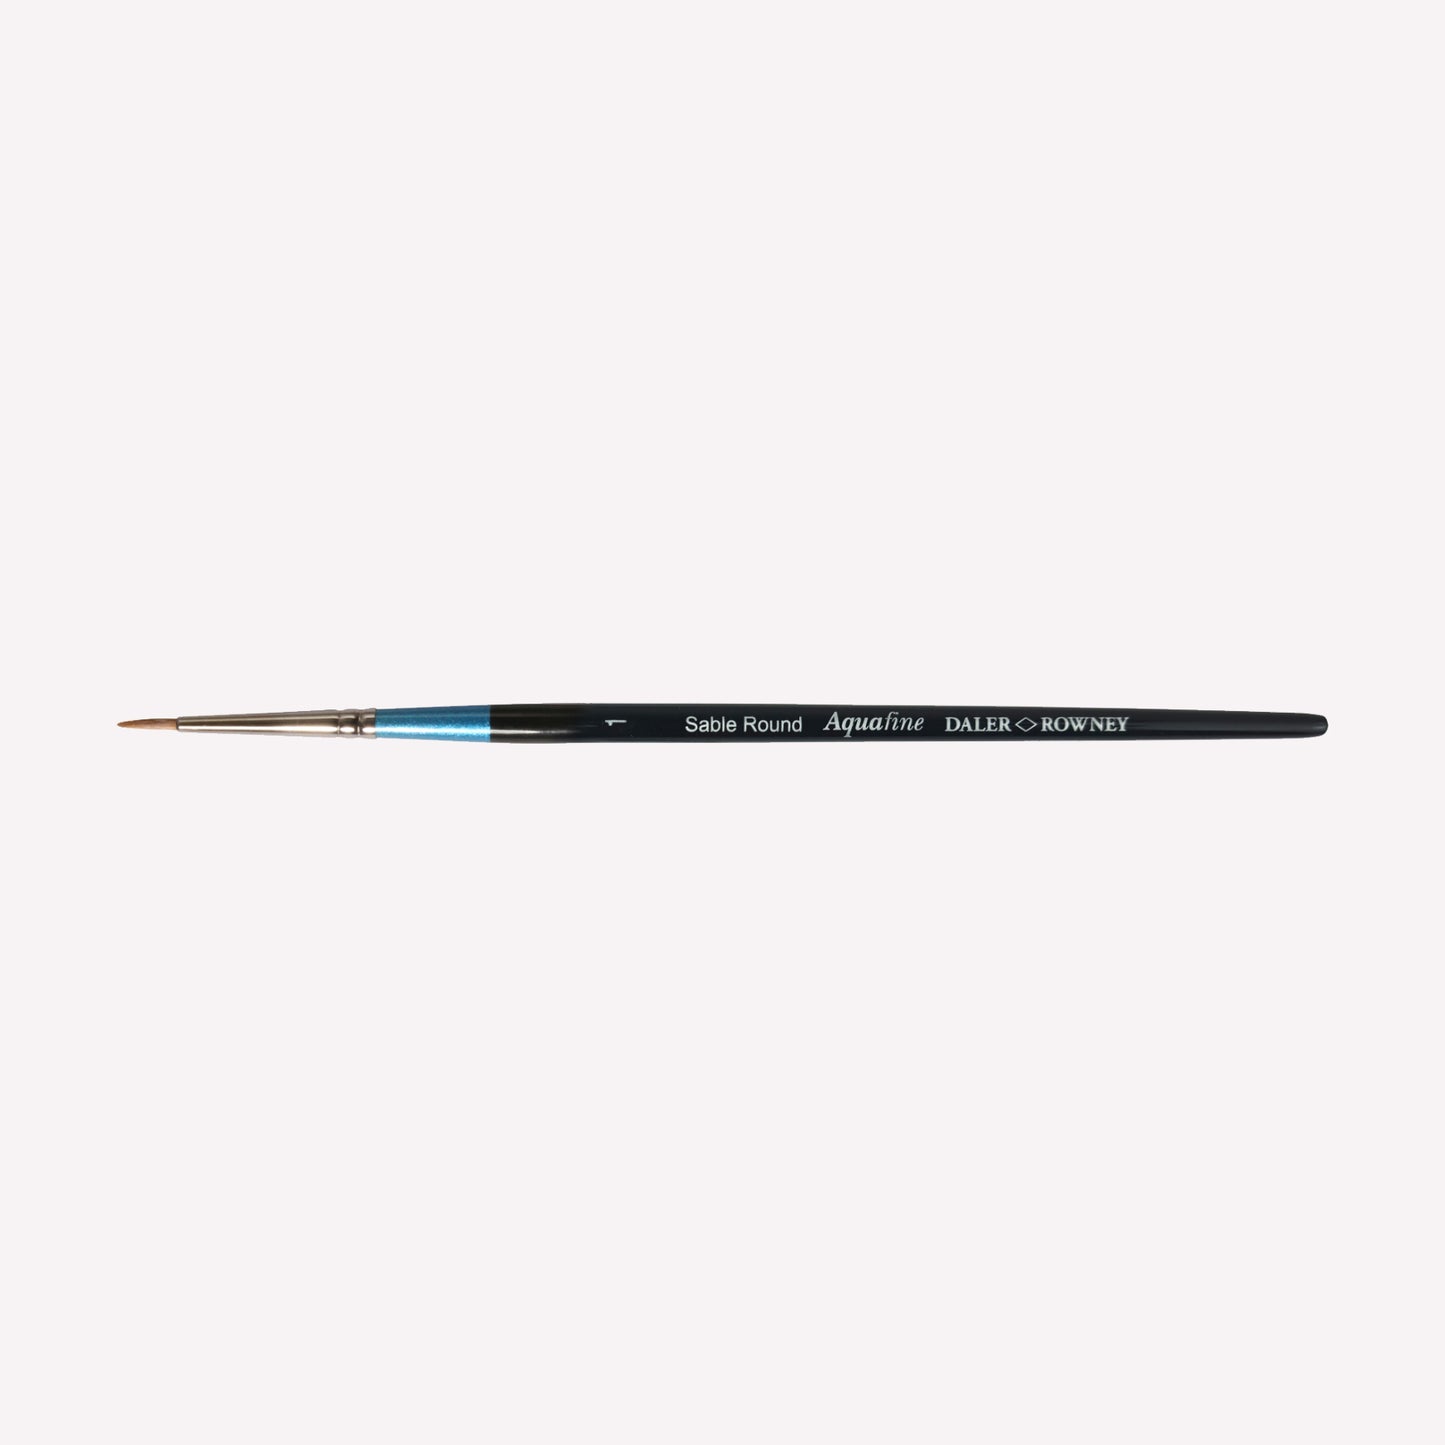 Daler Rowney Aquafine Sable round paintbrush in size 1. The natural filaments come to a fine point, perfect for detailed paintings. Brushes have a classy black handle with blue detailing and a silver ferrule. 